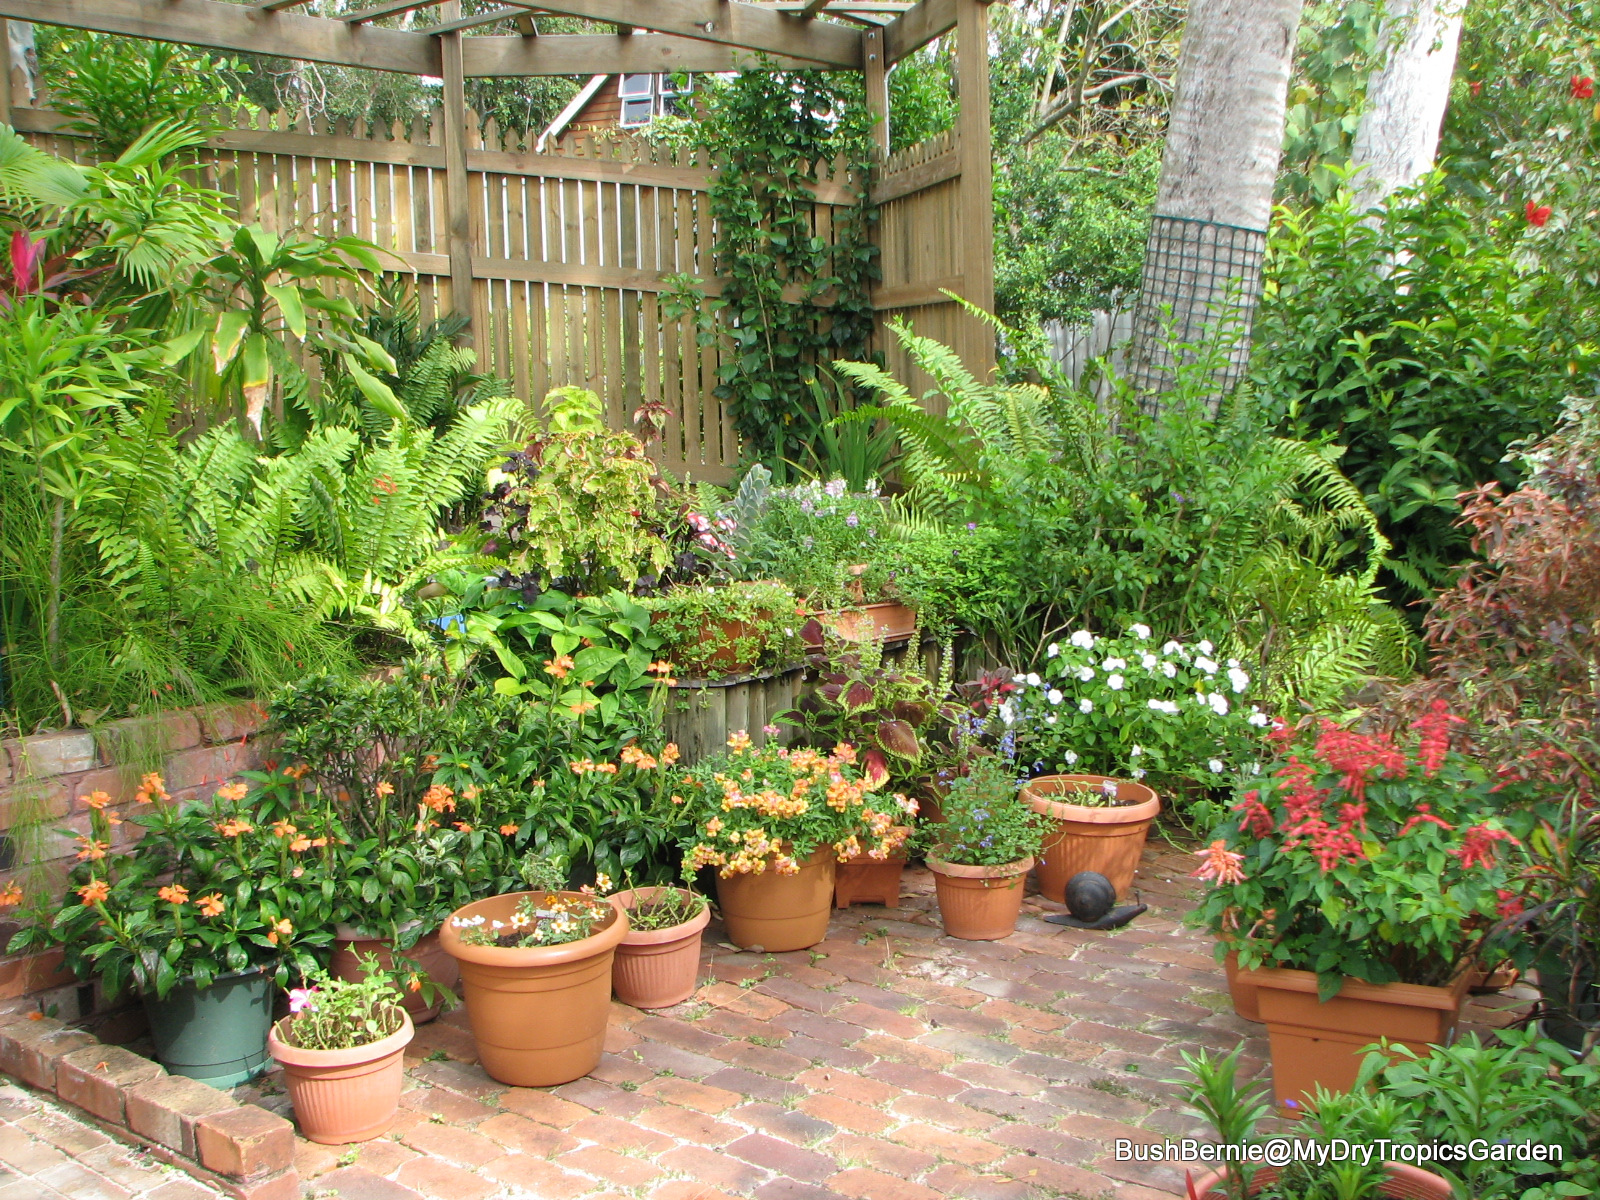 My Dry Tropics Garden: The End Of Winter Is Here ... My Dry Tropics ...